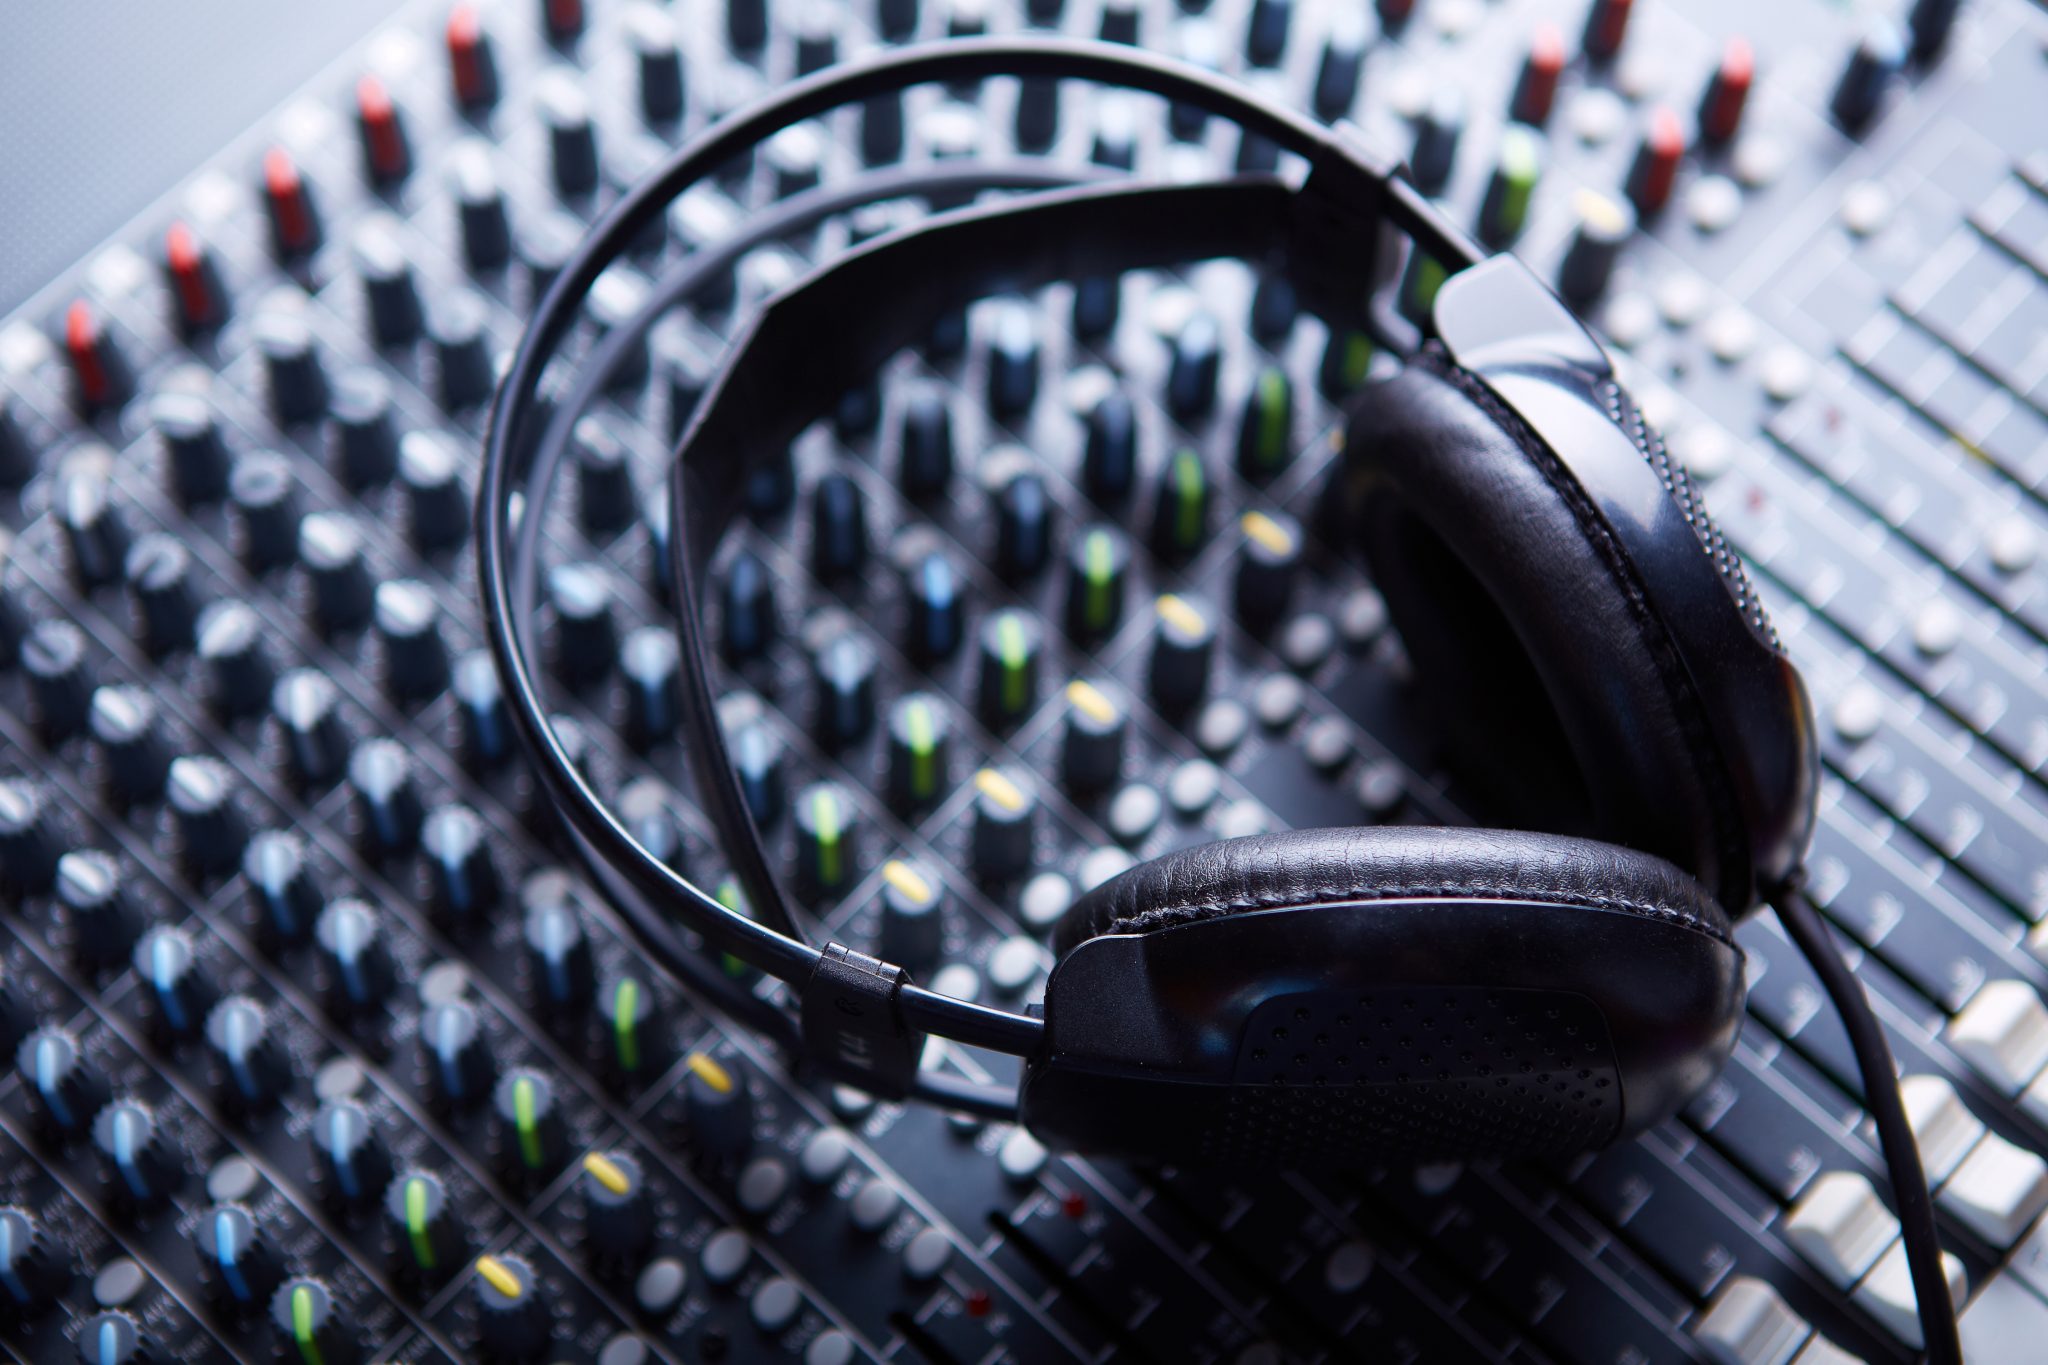 Expand Your Audio Production Career in Just 6 Months!